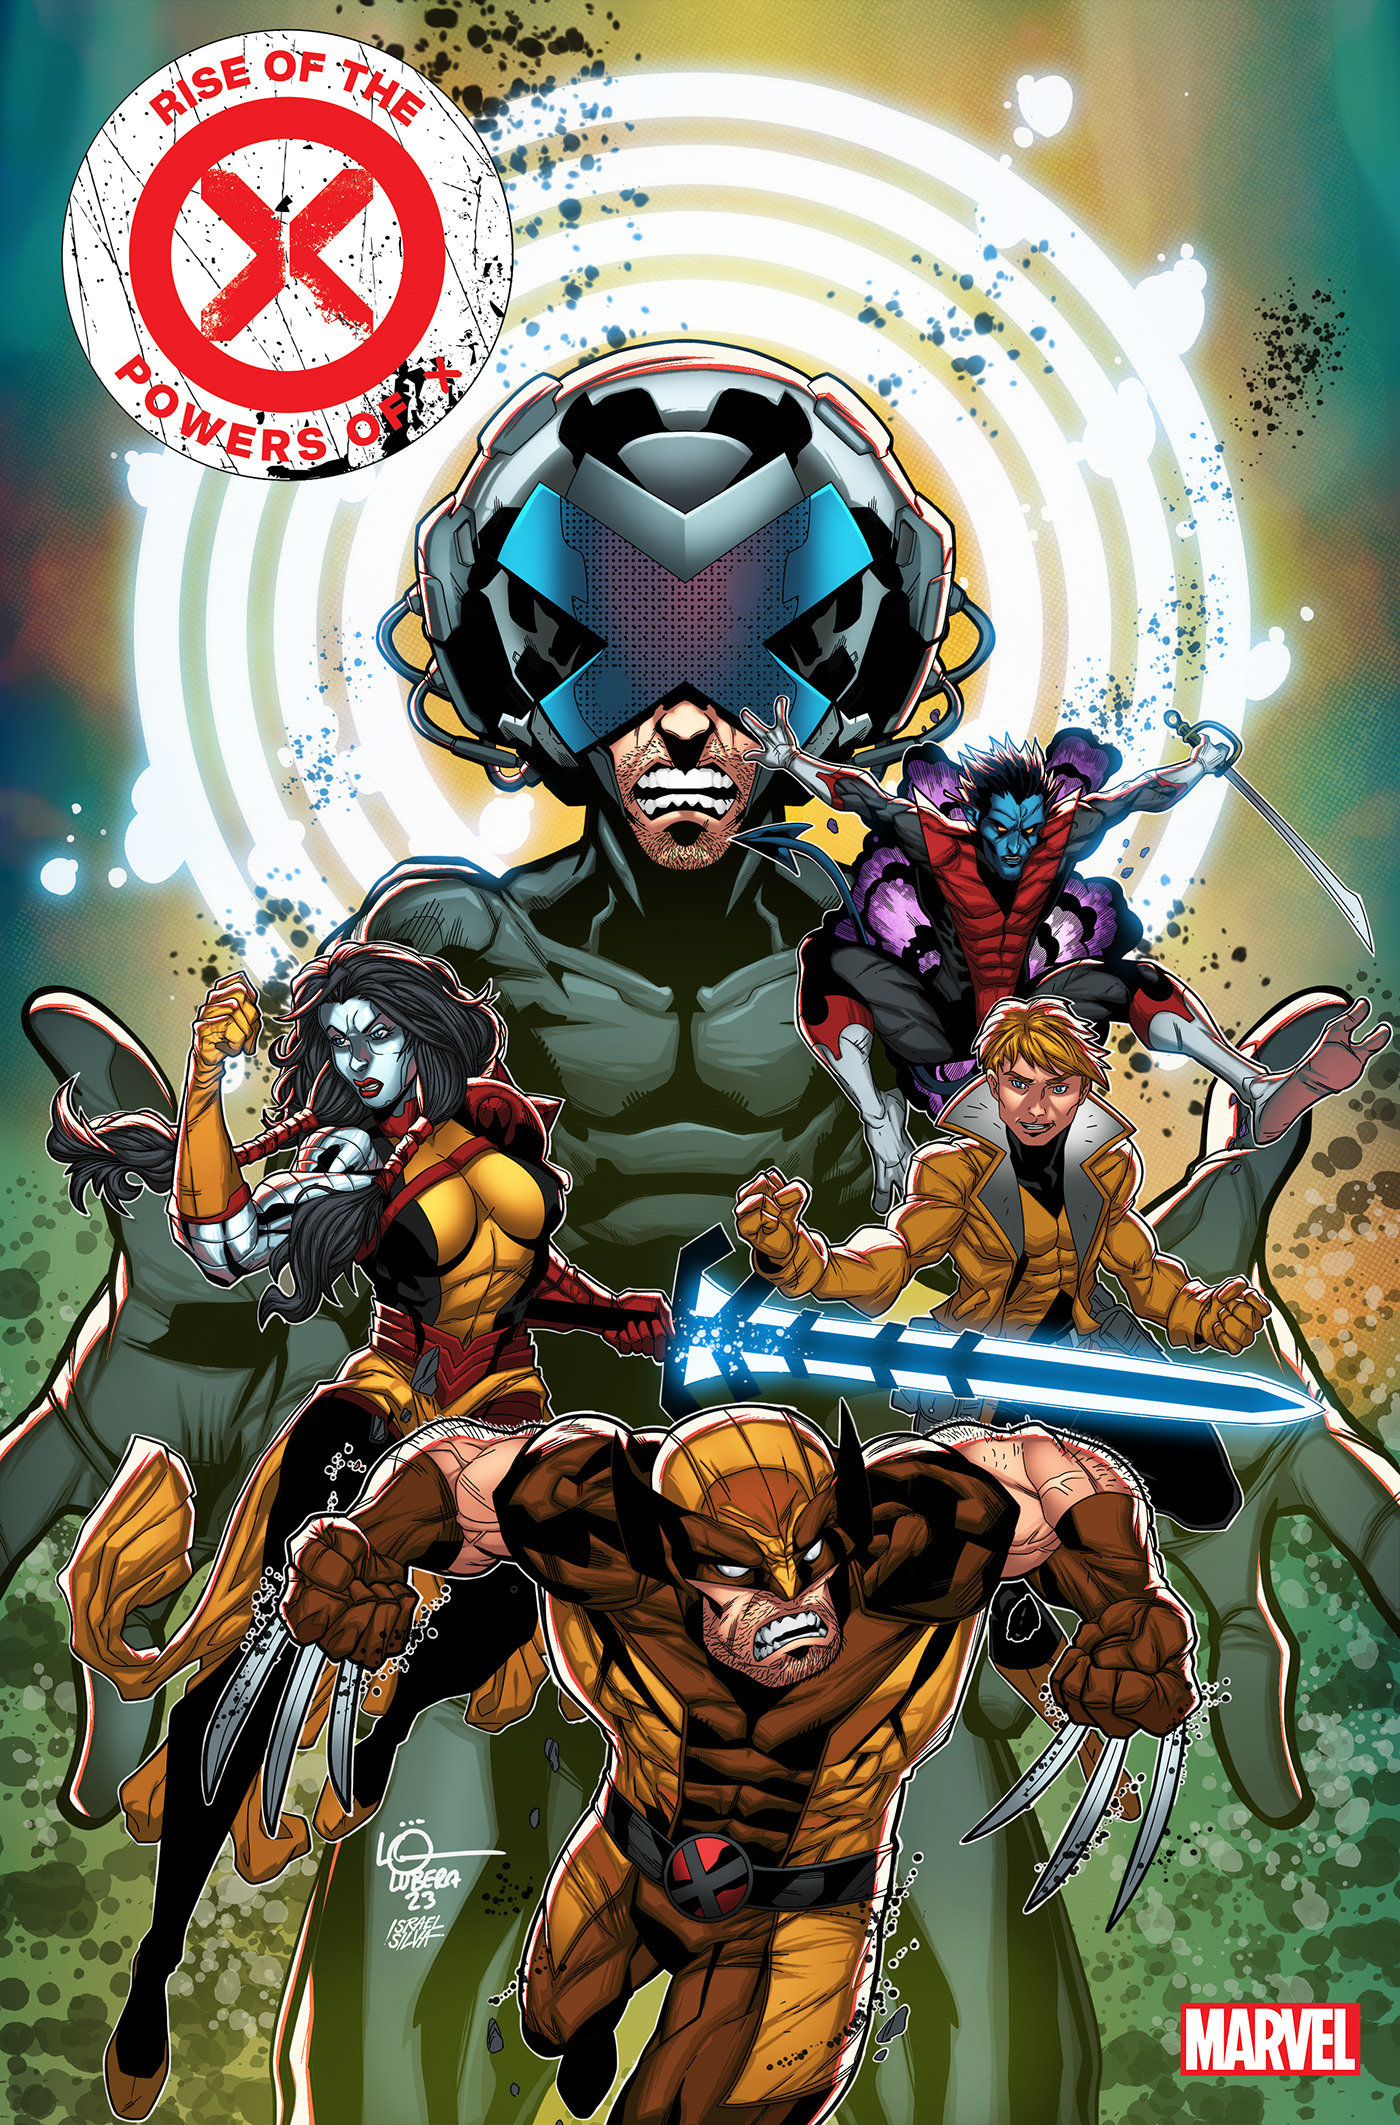 Rise of the Powers of X #2 1 for 25 Logan Lubera (Fall of the House of X)